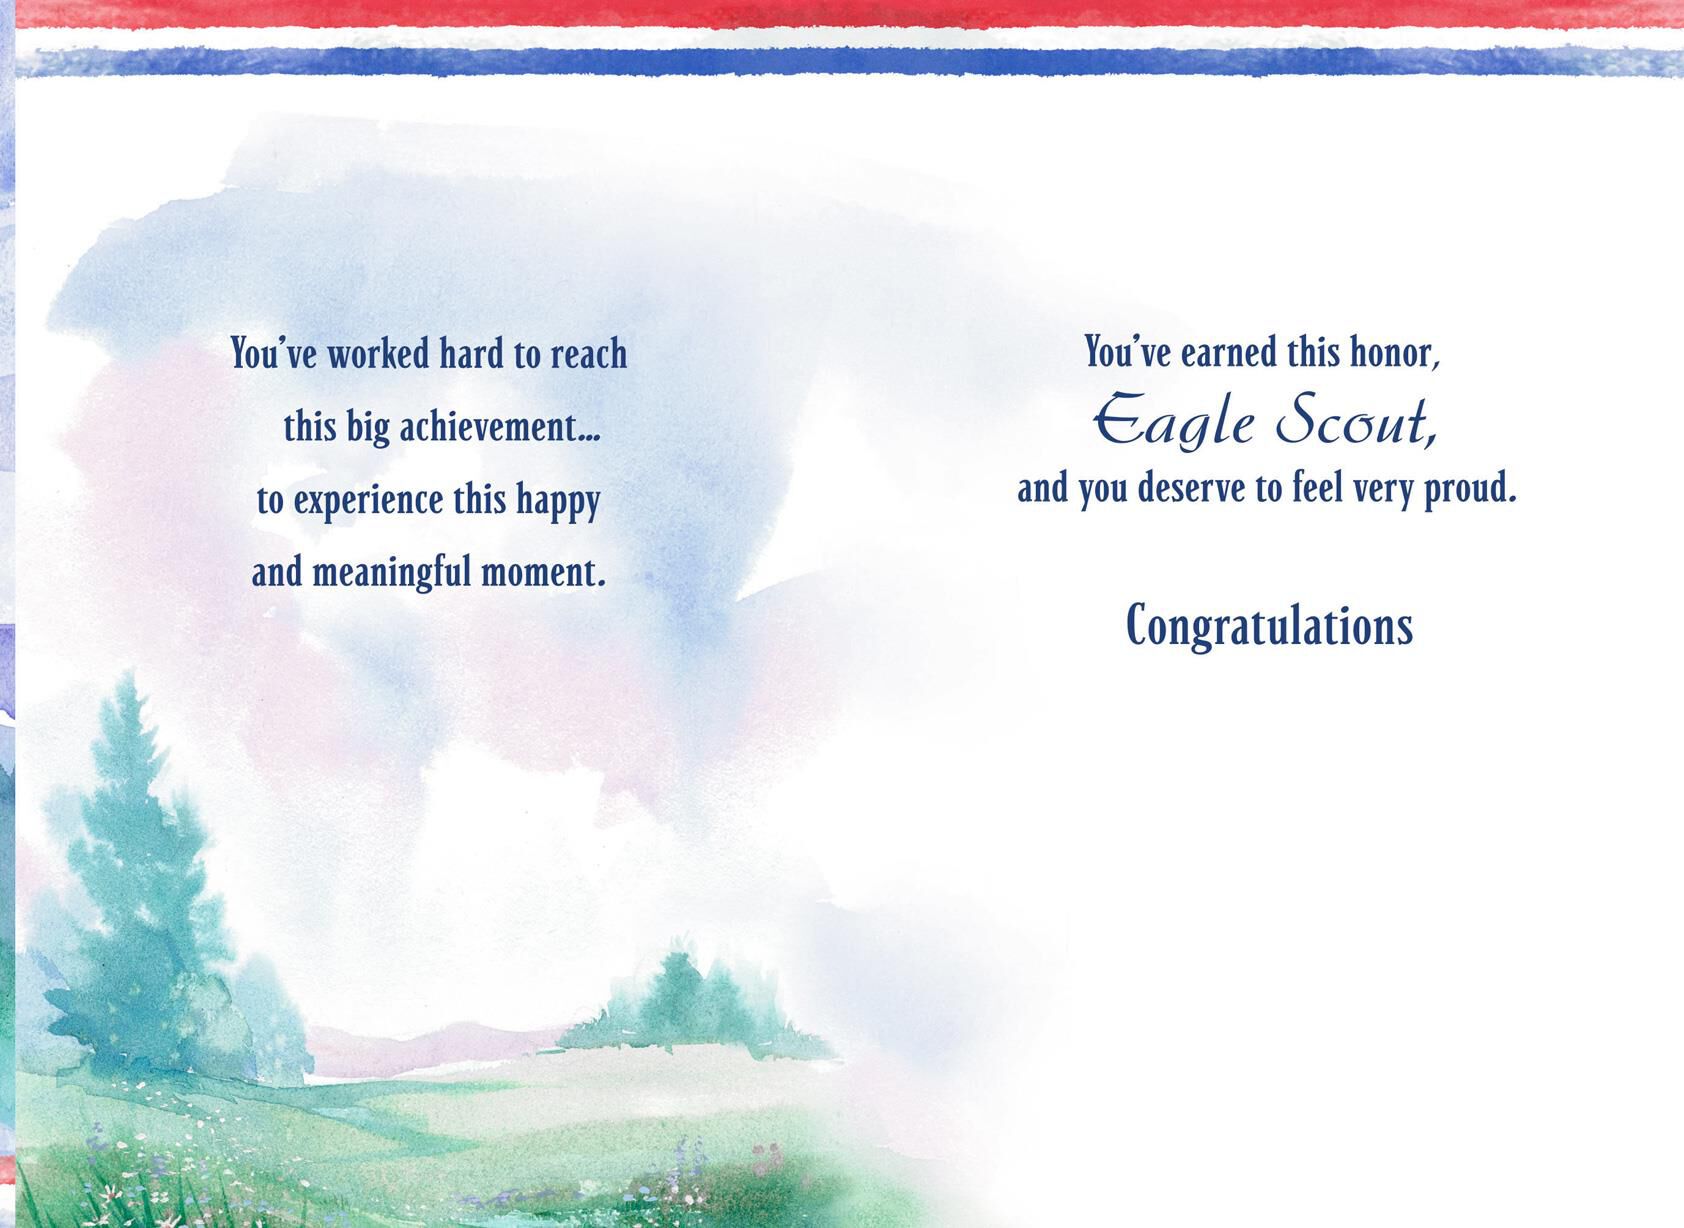 a-model-of-character-eagle-scout-congratulations-card-greeting-cards-hallmark